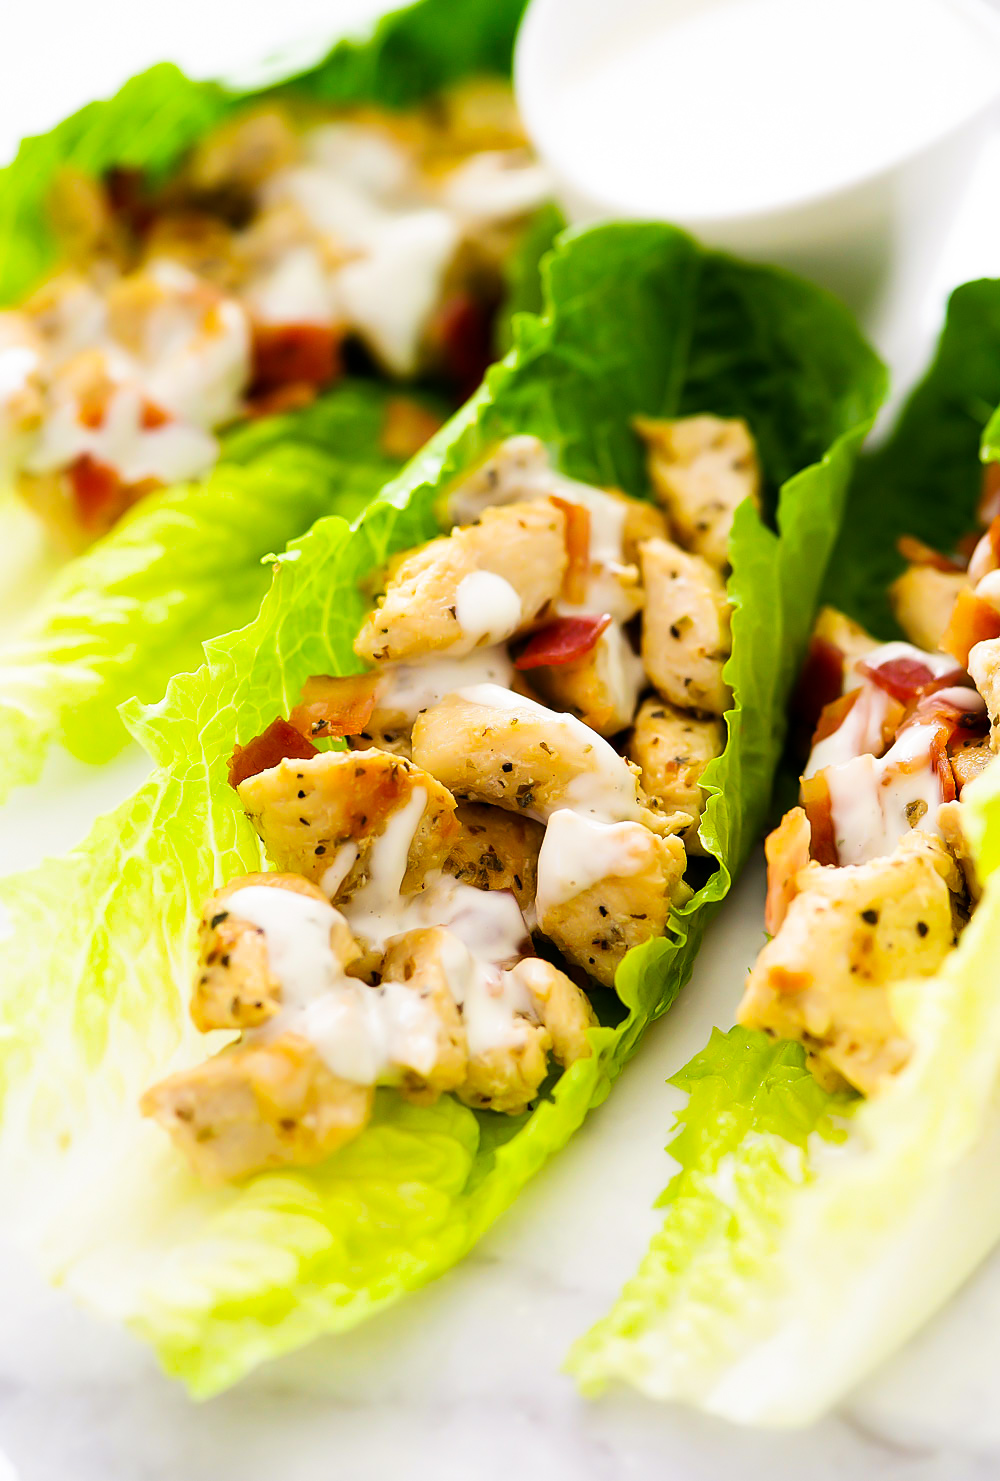 Seasoned chicken and crumbled bacon are filled inside of romaine lettuce leaves. They are topped off with ranch dressing.